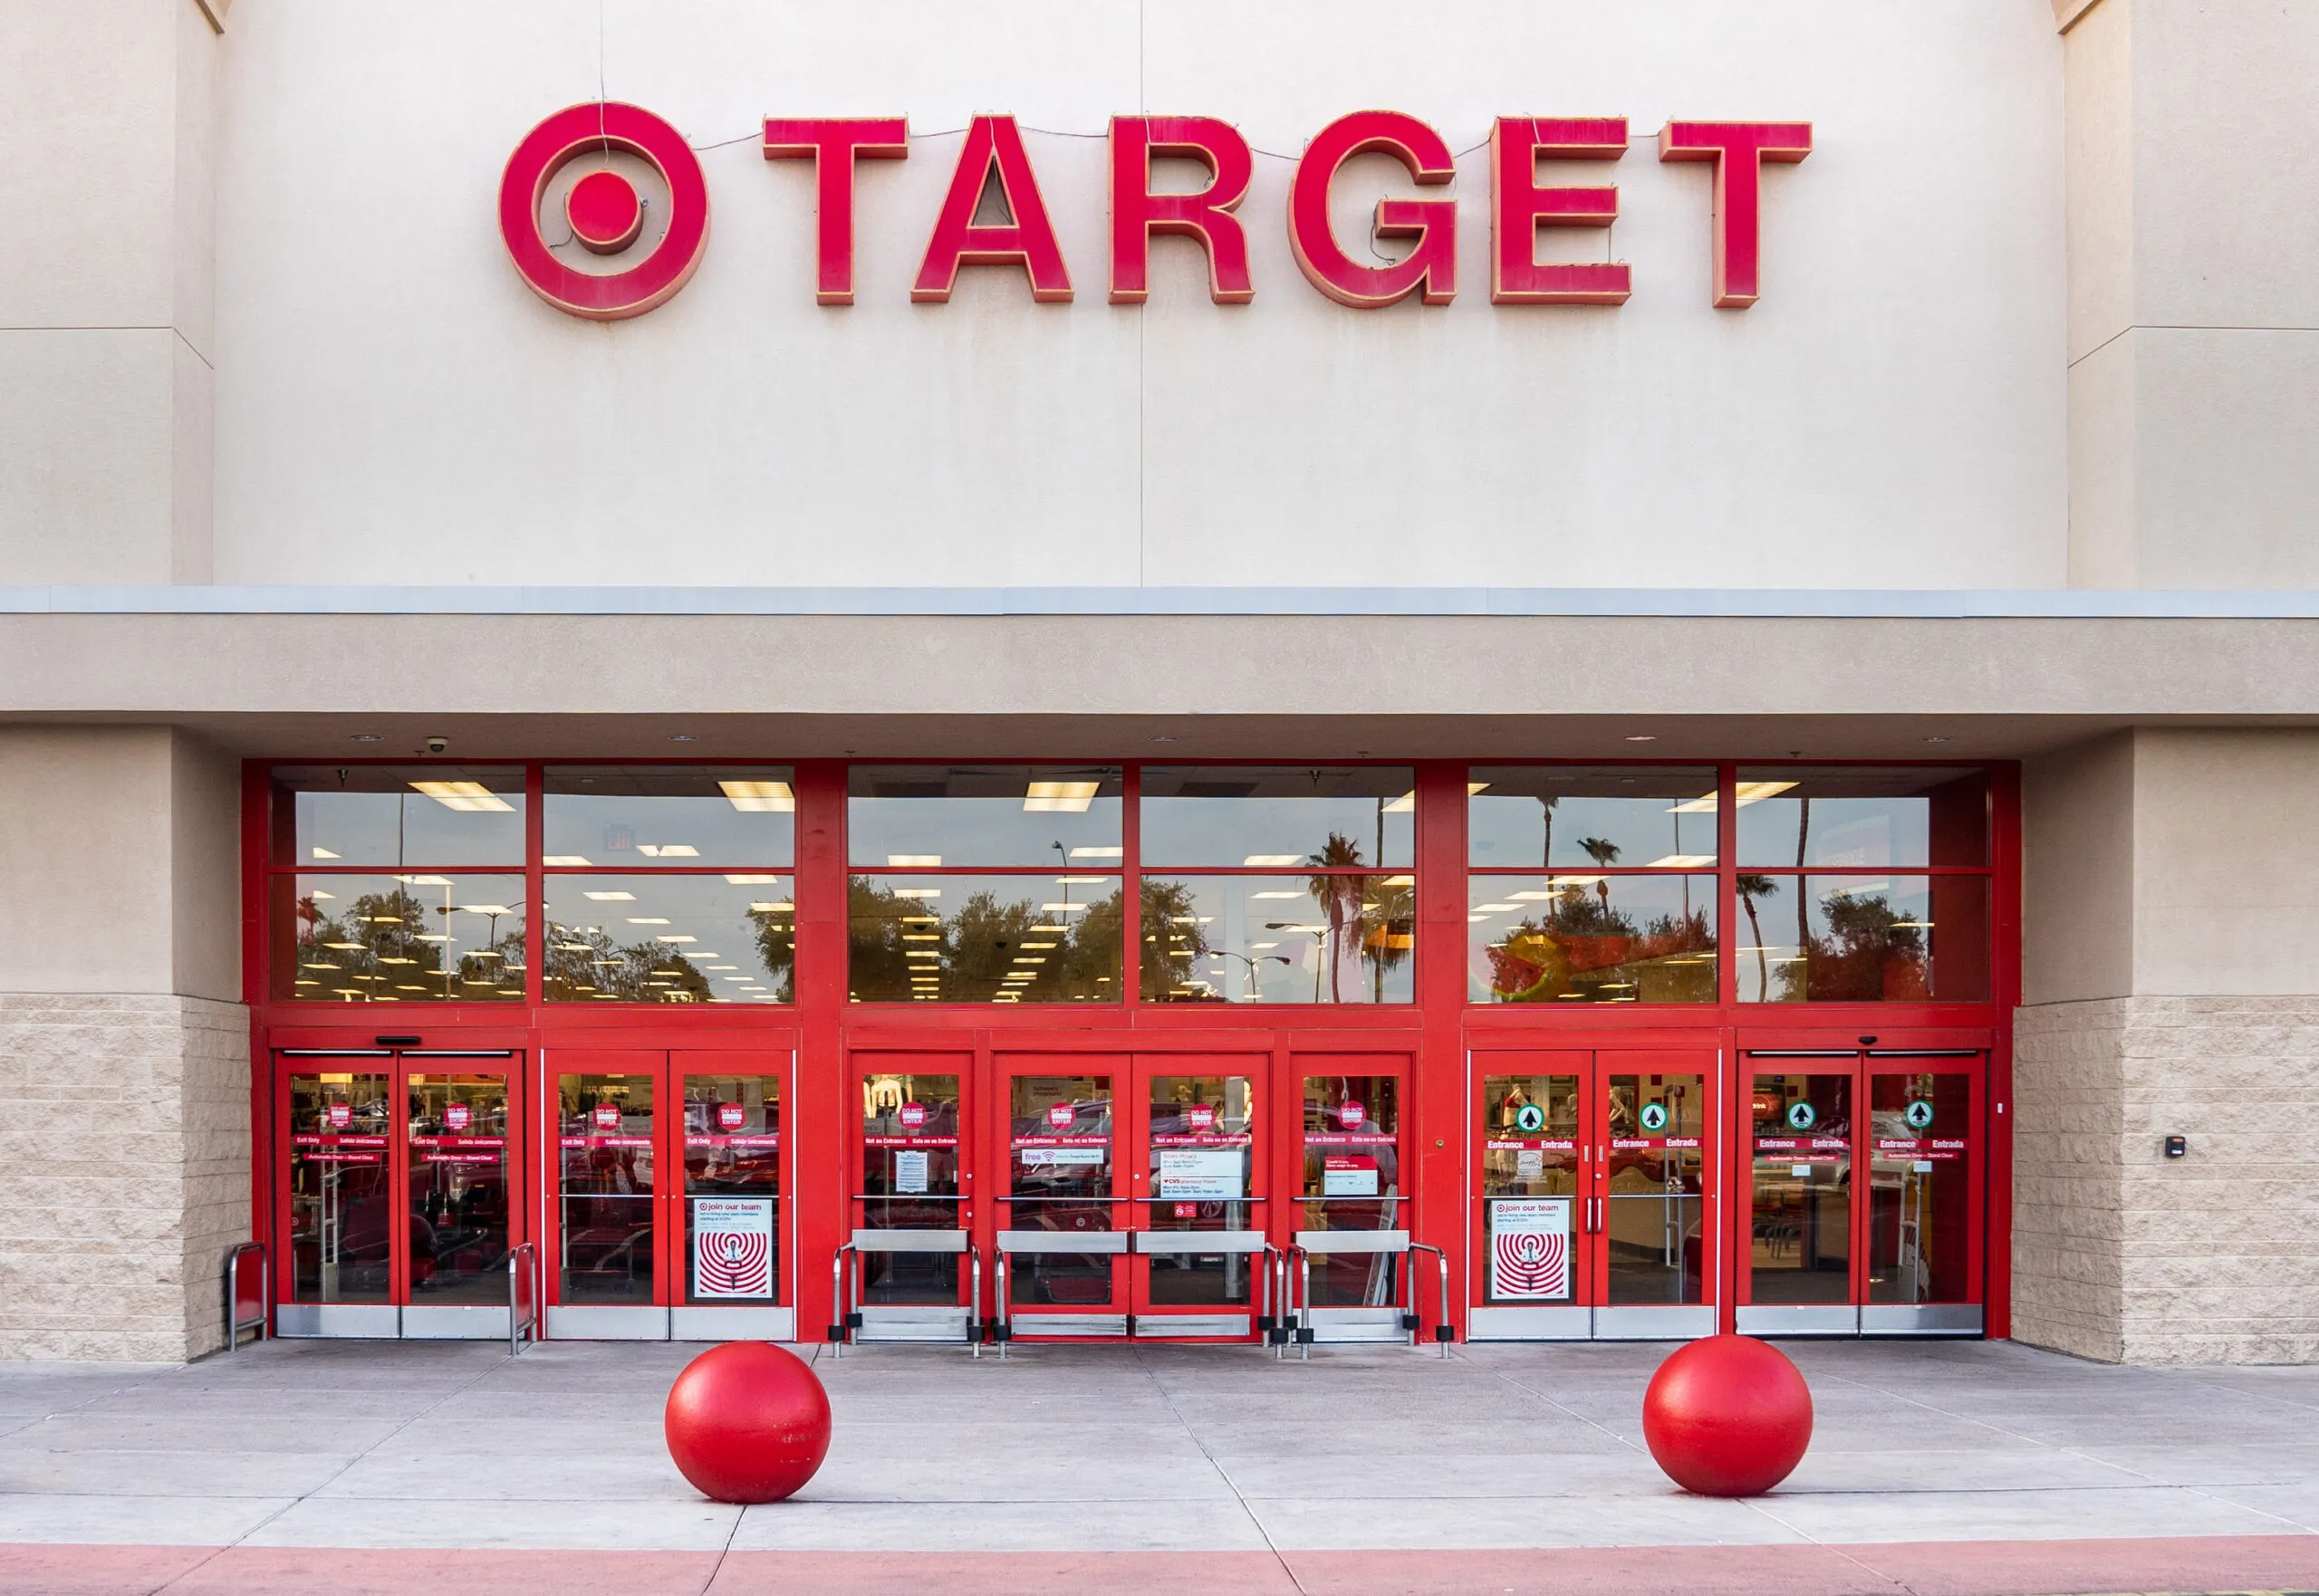 Target stores in Oklahoma evacuated after bomb threats